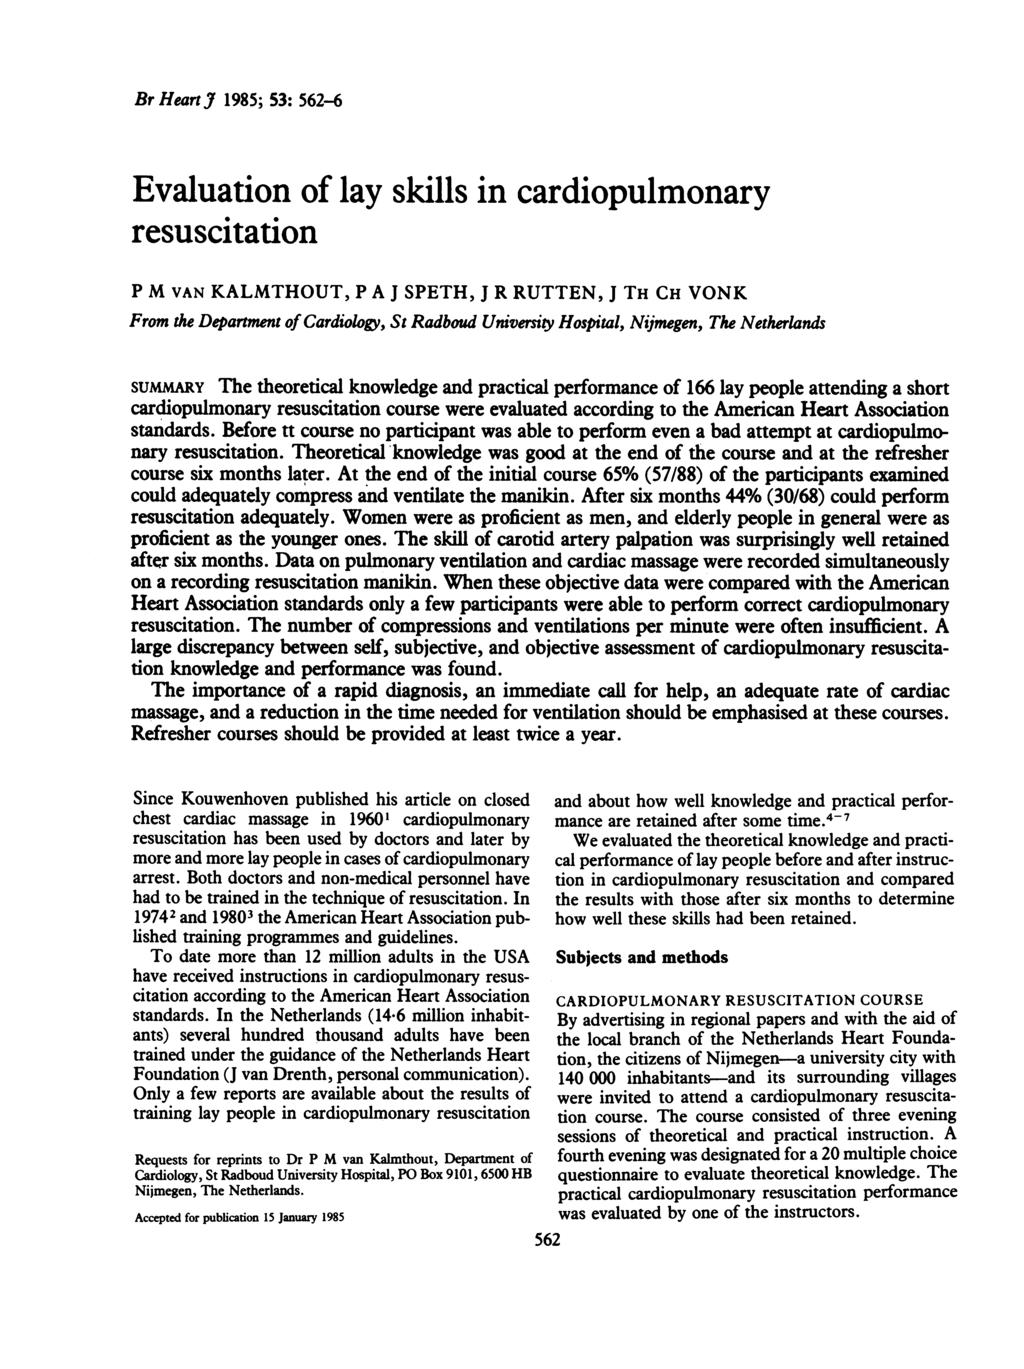 Br Heart J 1985; 53: 562-6 Evaluation of lay skills in cardiopulmonary resuscitation P M VAN KALMTHOUT, P A J SPETH, J R RUTTEN, J TH CH VONK From the Department of Cardiology, St Radboud University